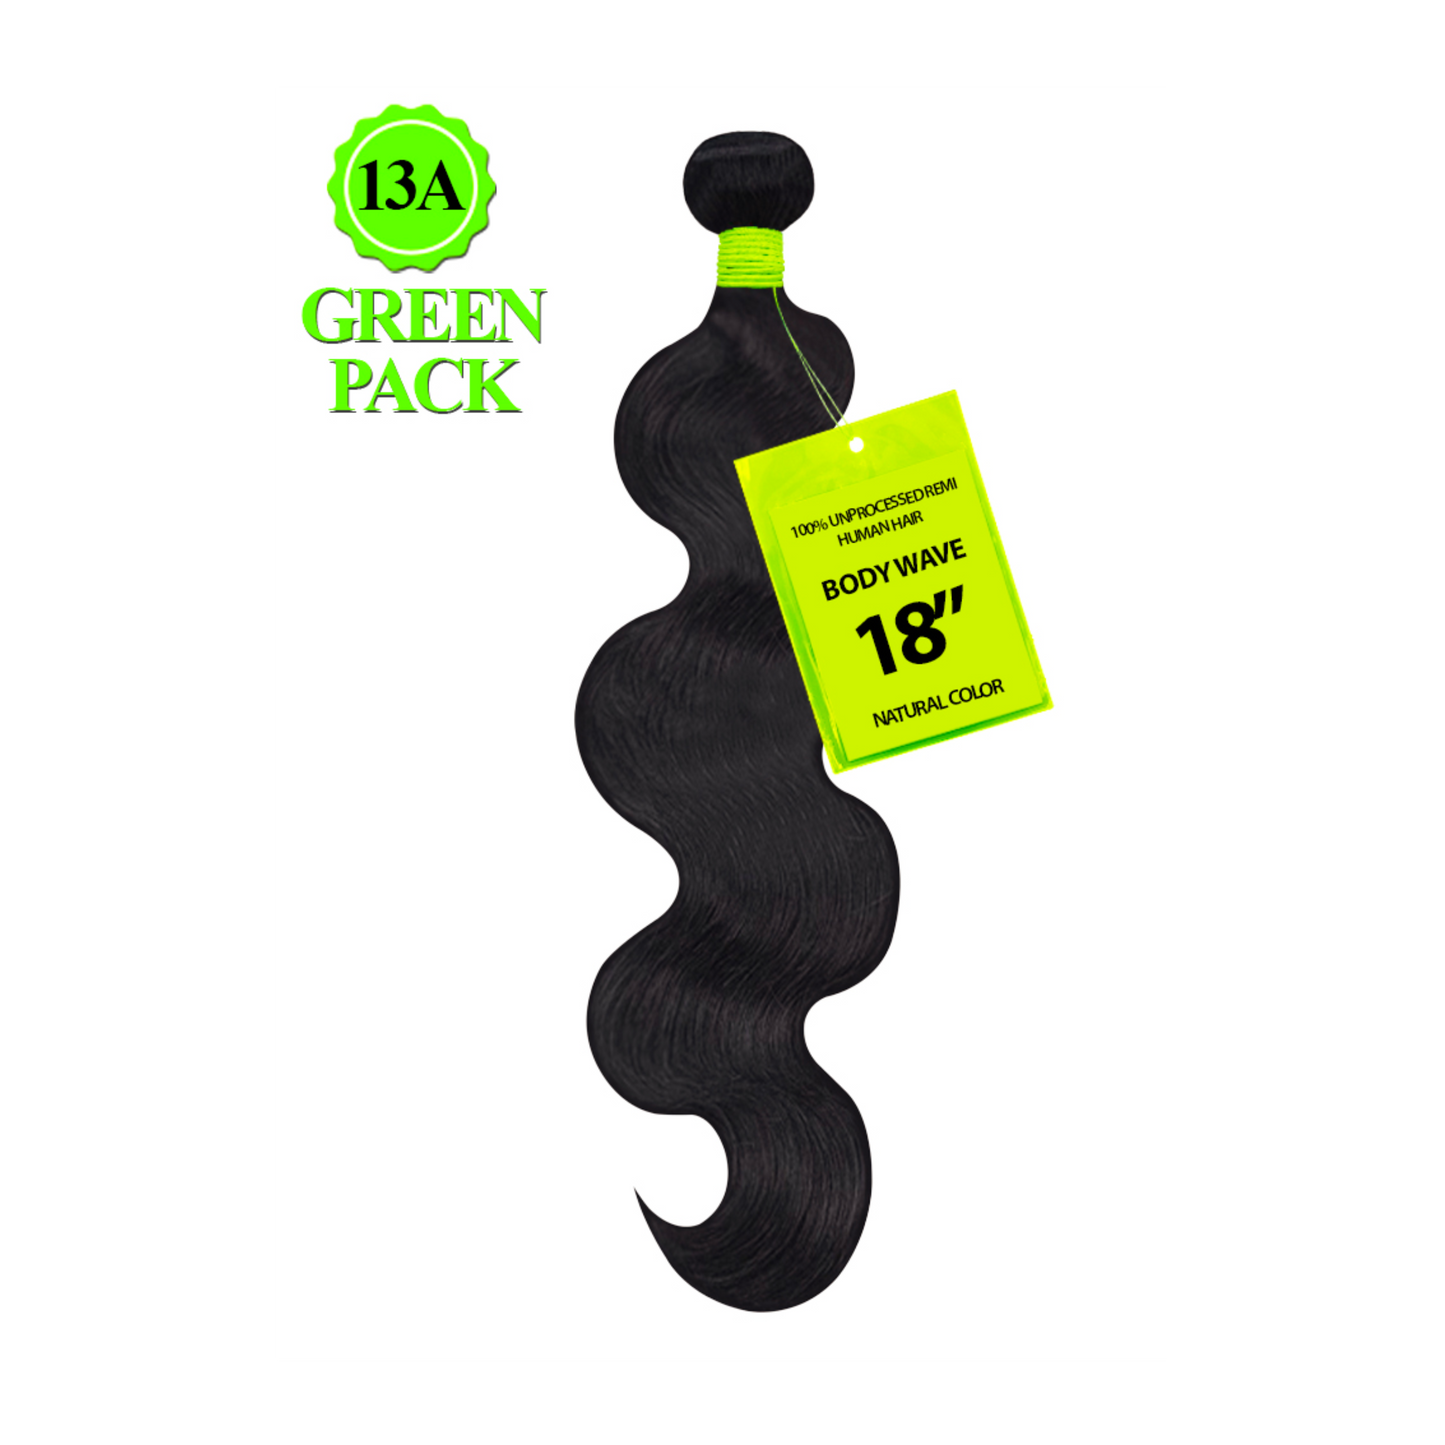 GREEN PACK SINGLE 13A